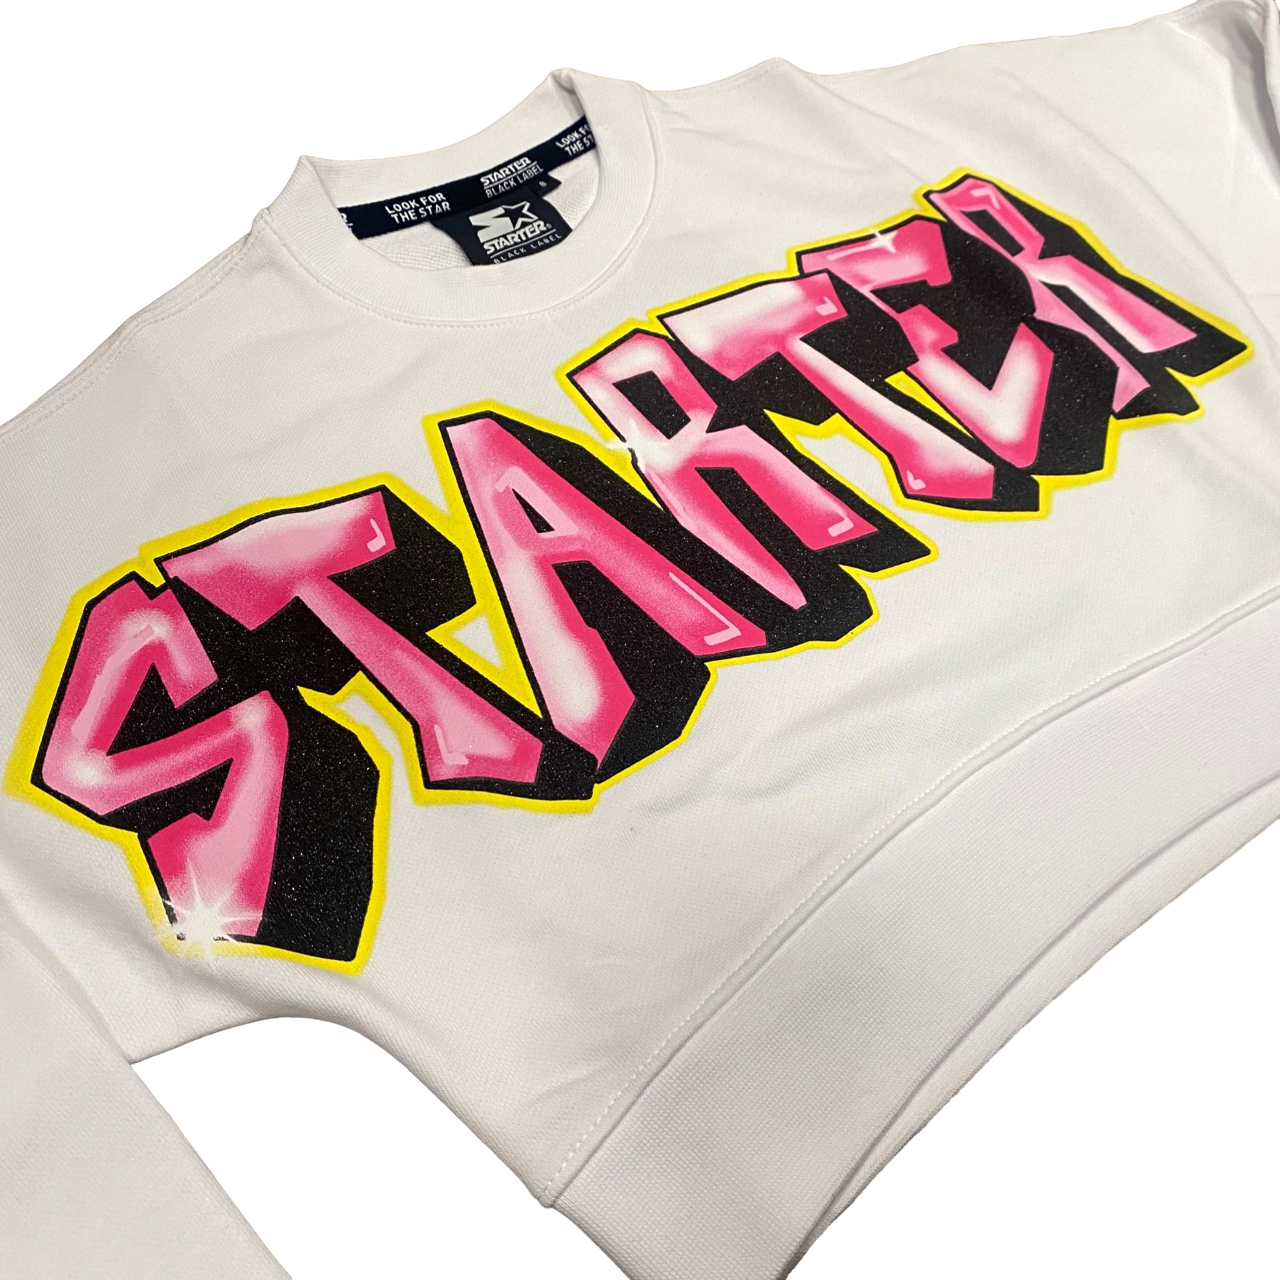 Starter crewneck sweatshirt for girls with front print. White color